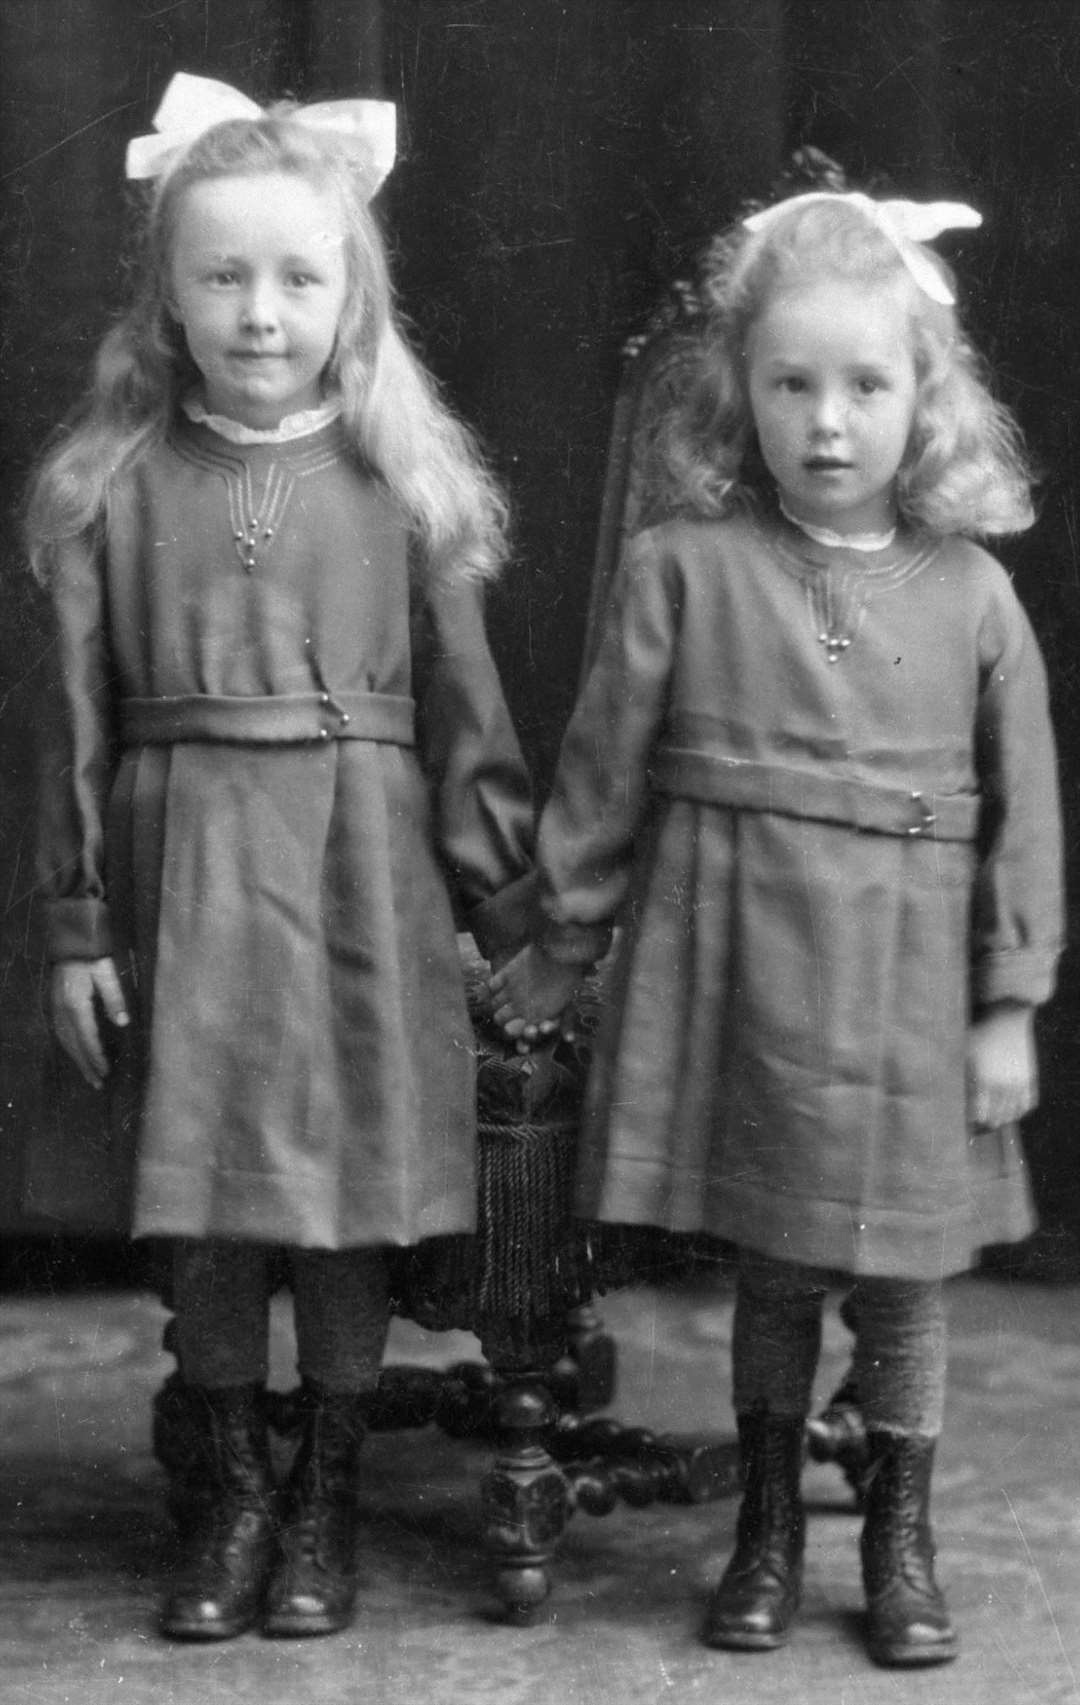 A studio portrait from 1921 showing Peggy Ross and her sister, thought to be called Janet, who were pupils at Shebster school.